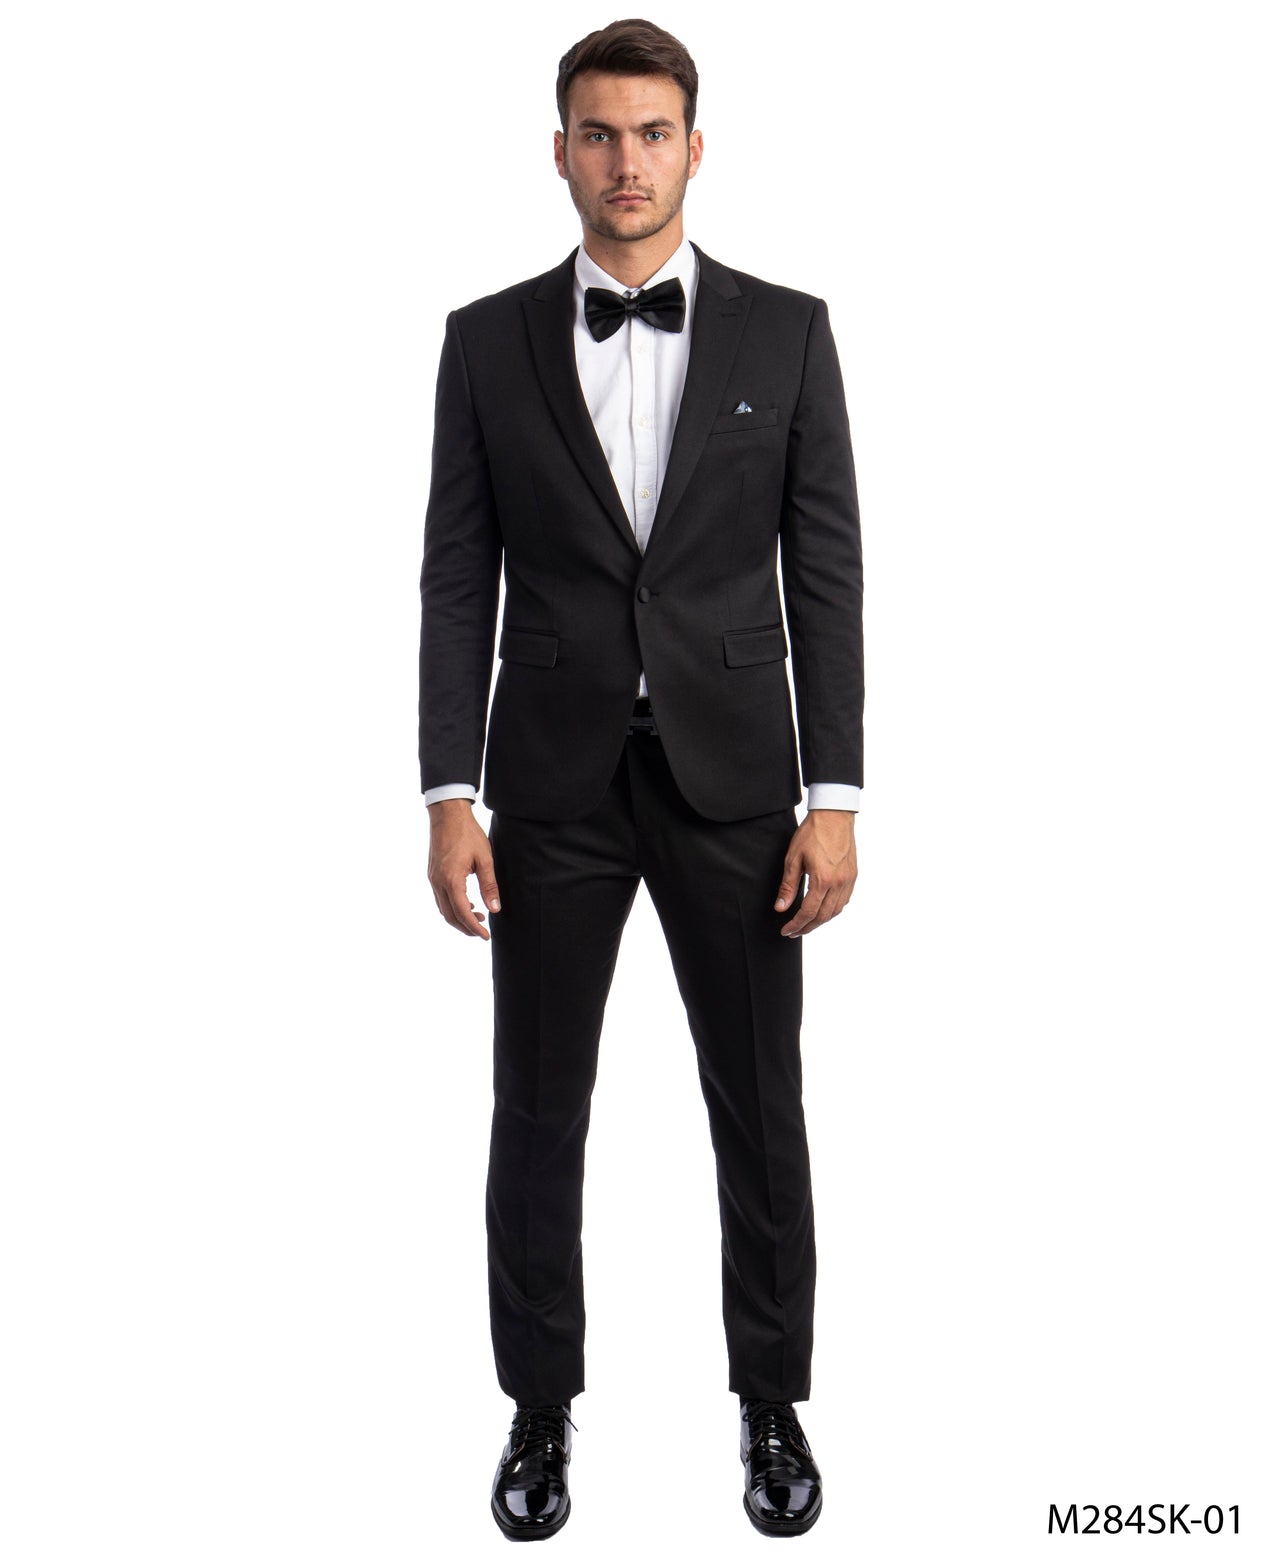 Black Suit For Men Formal Suits For All Ocassions - Hattitude